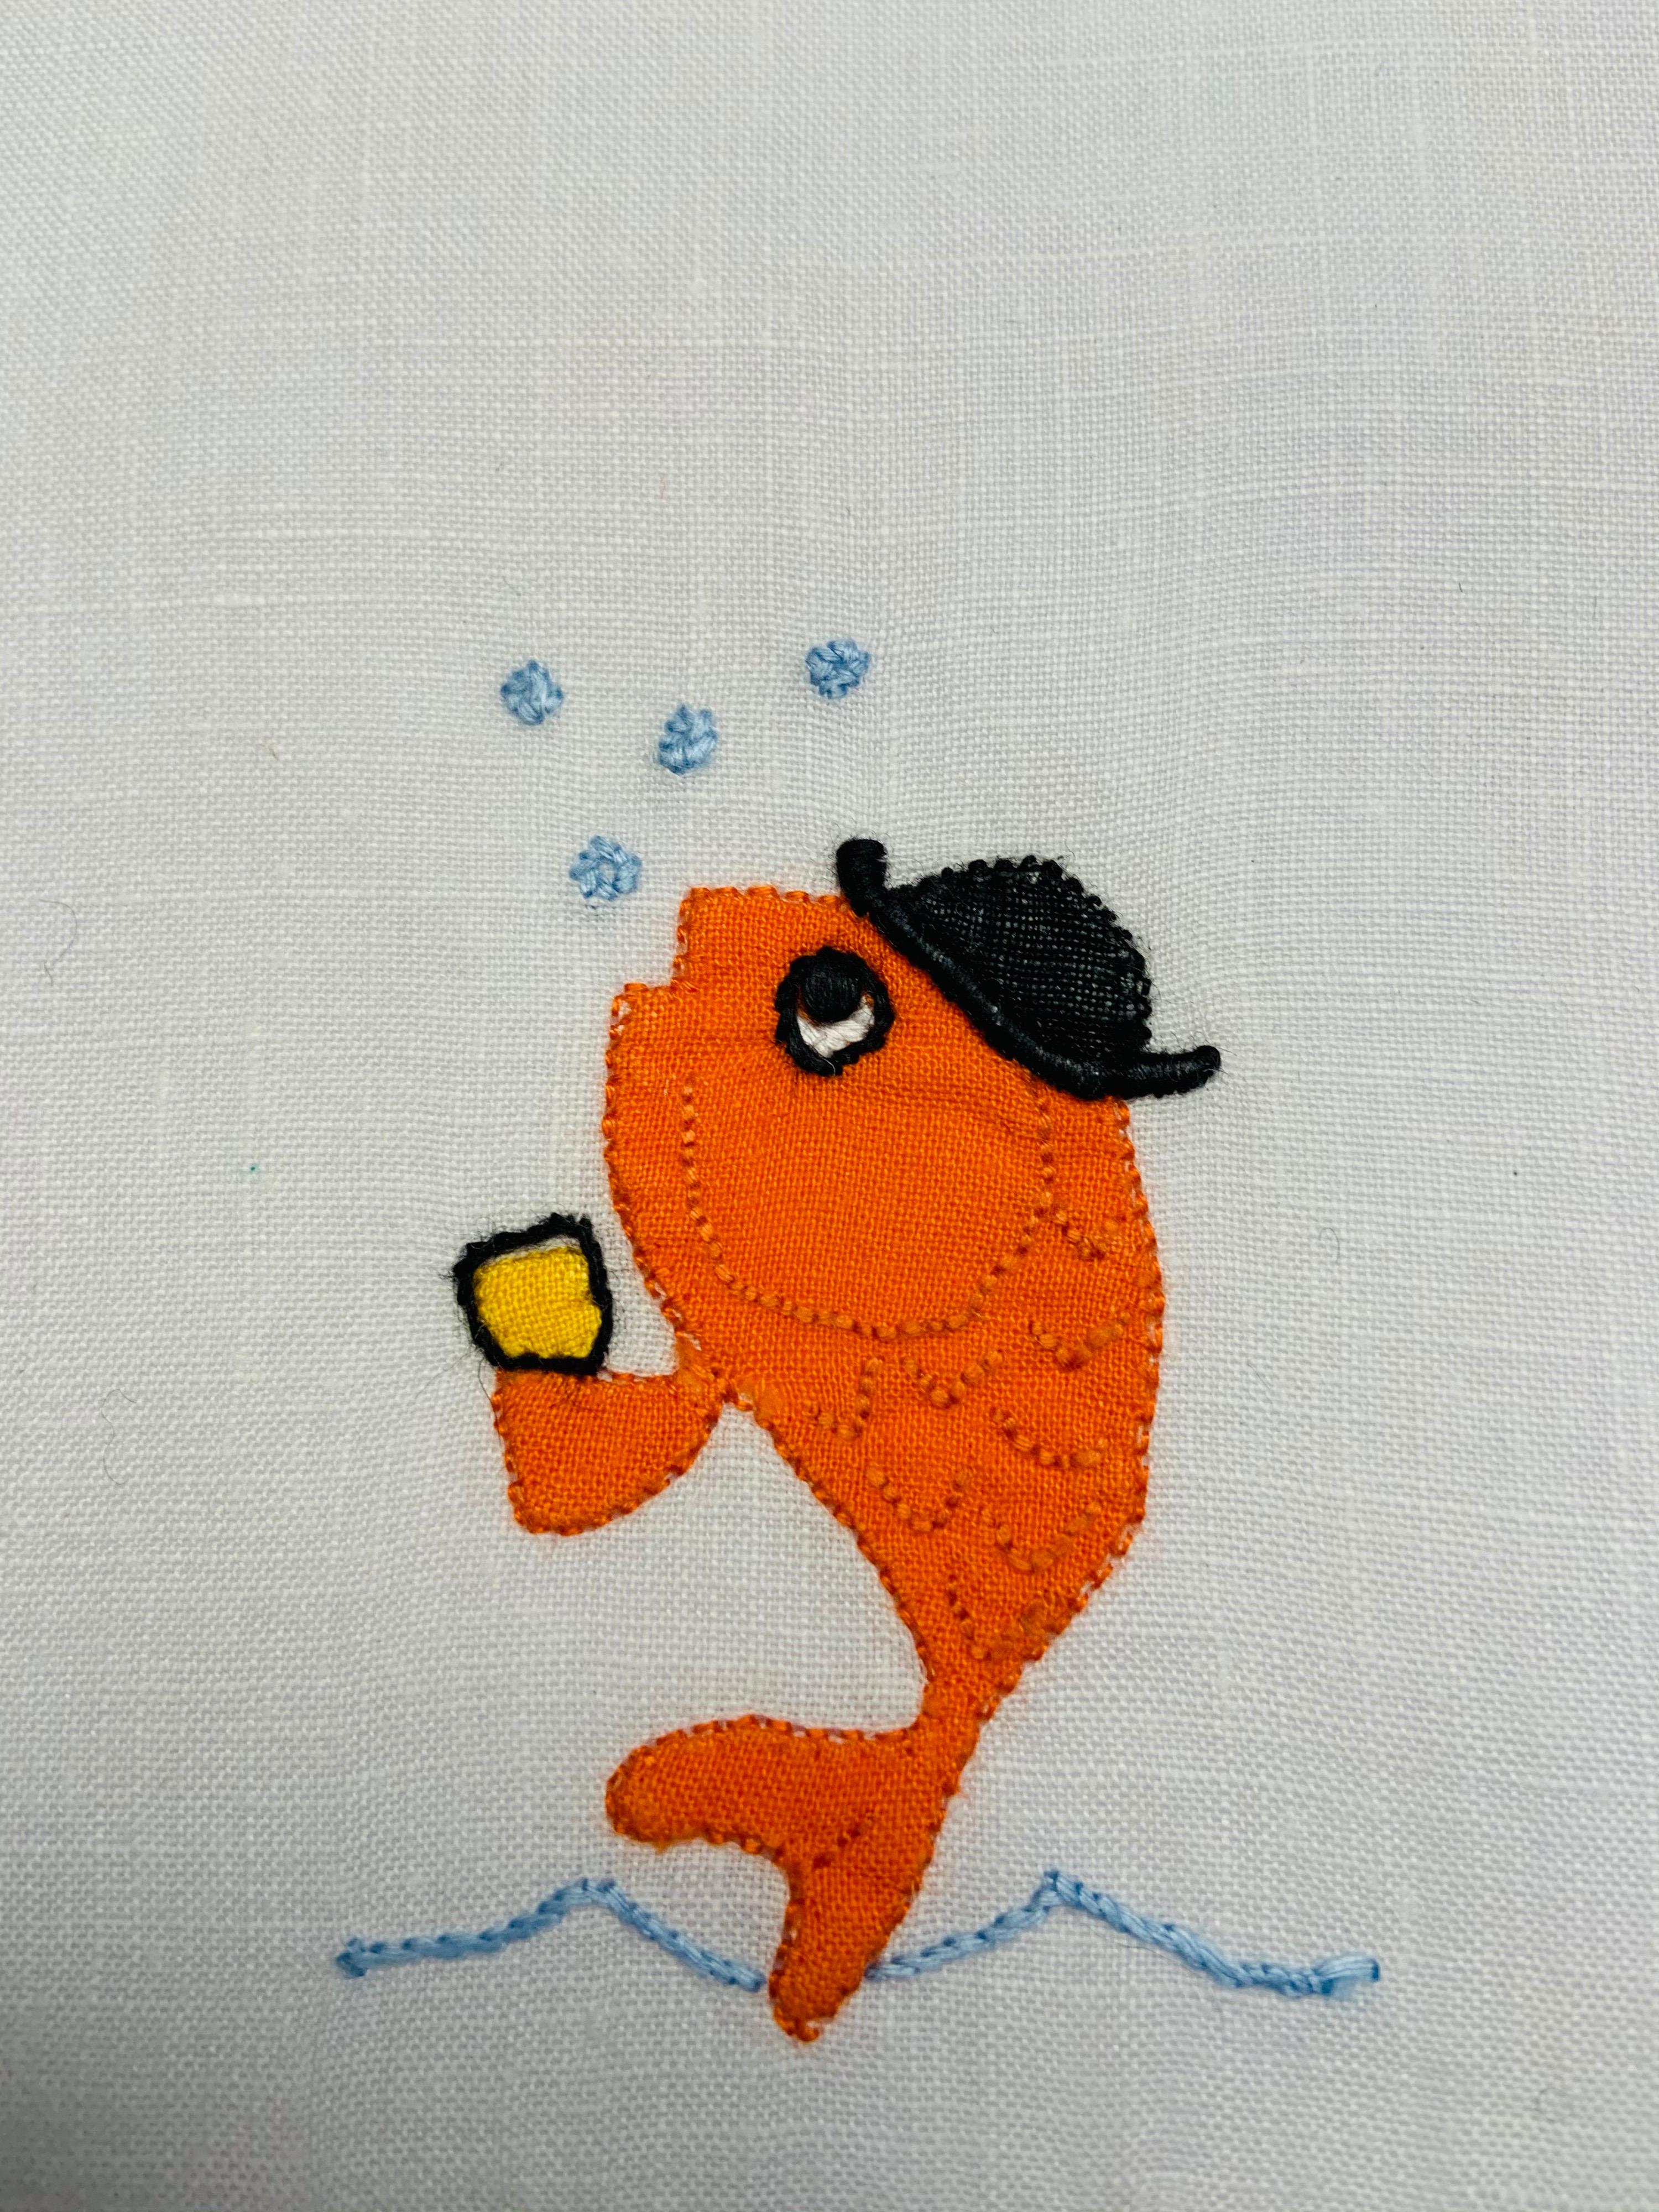 School of Fish Appliqued and Embroidered Linen Cocktail Napkins, Set of Six 3